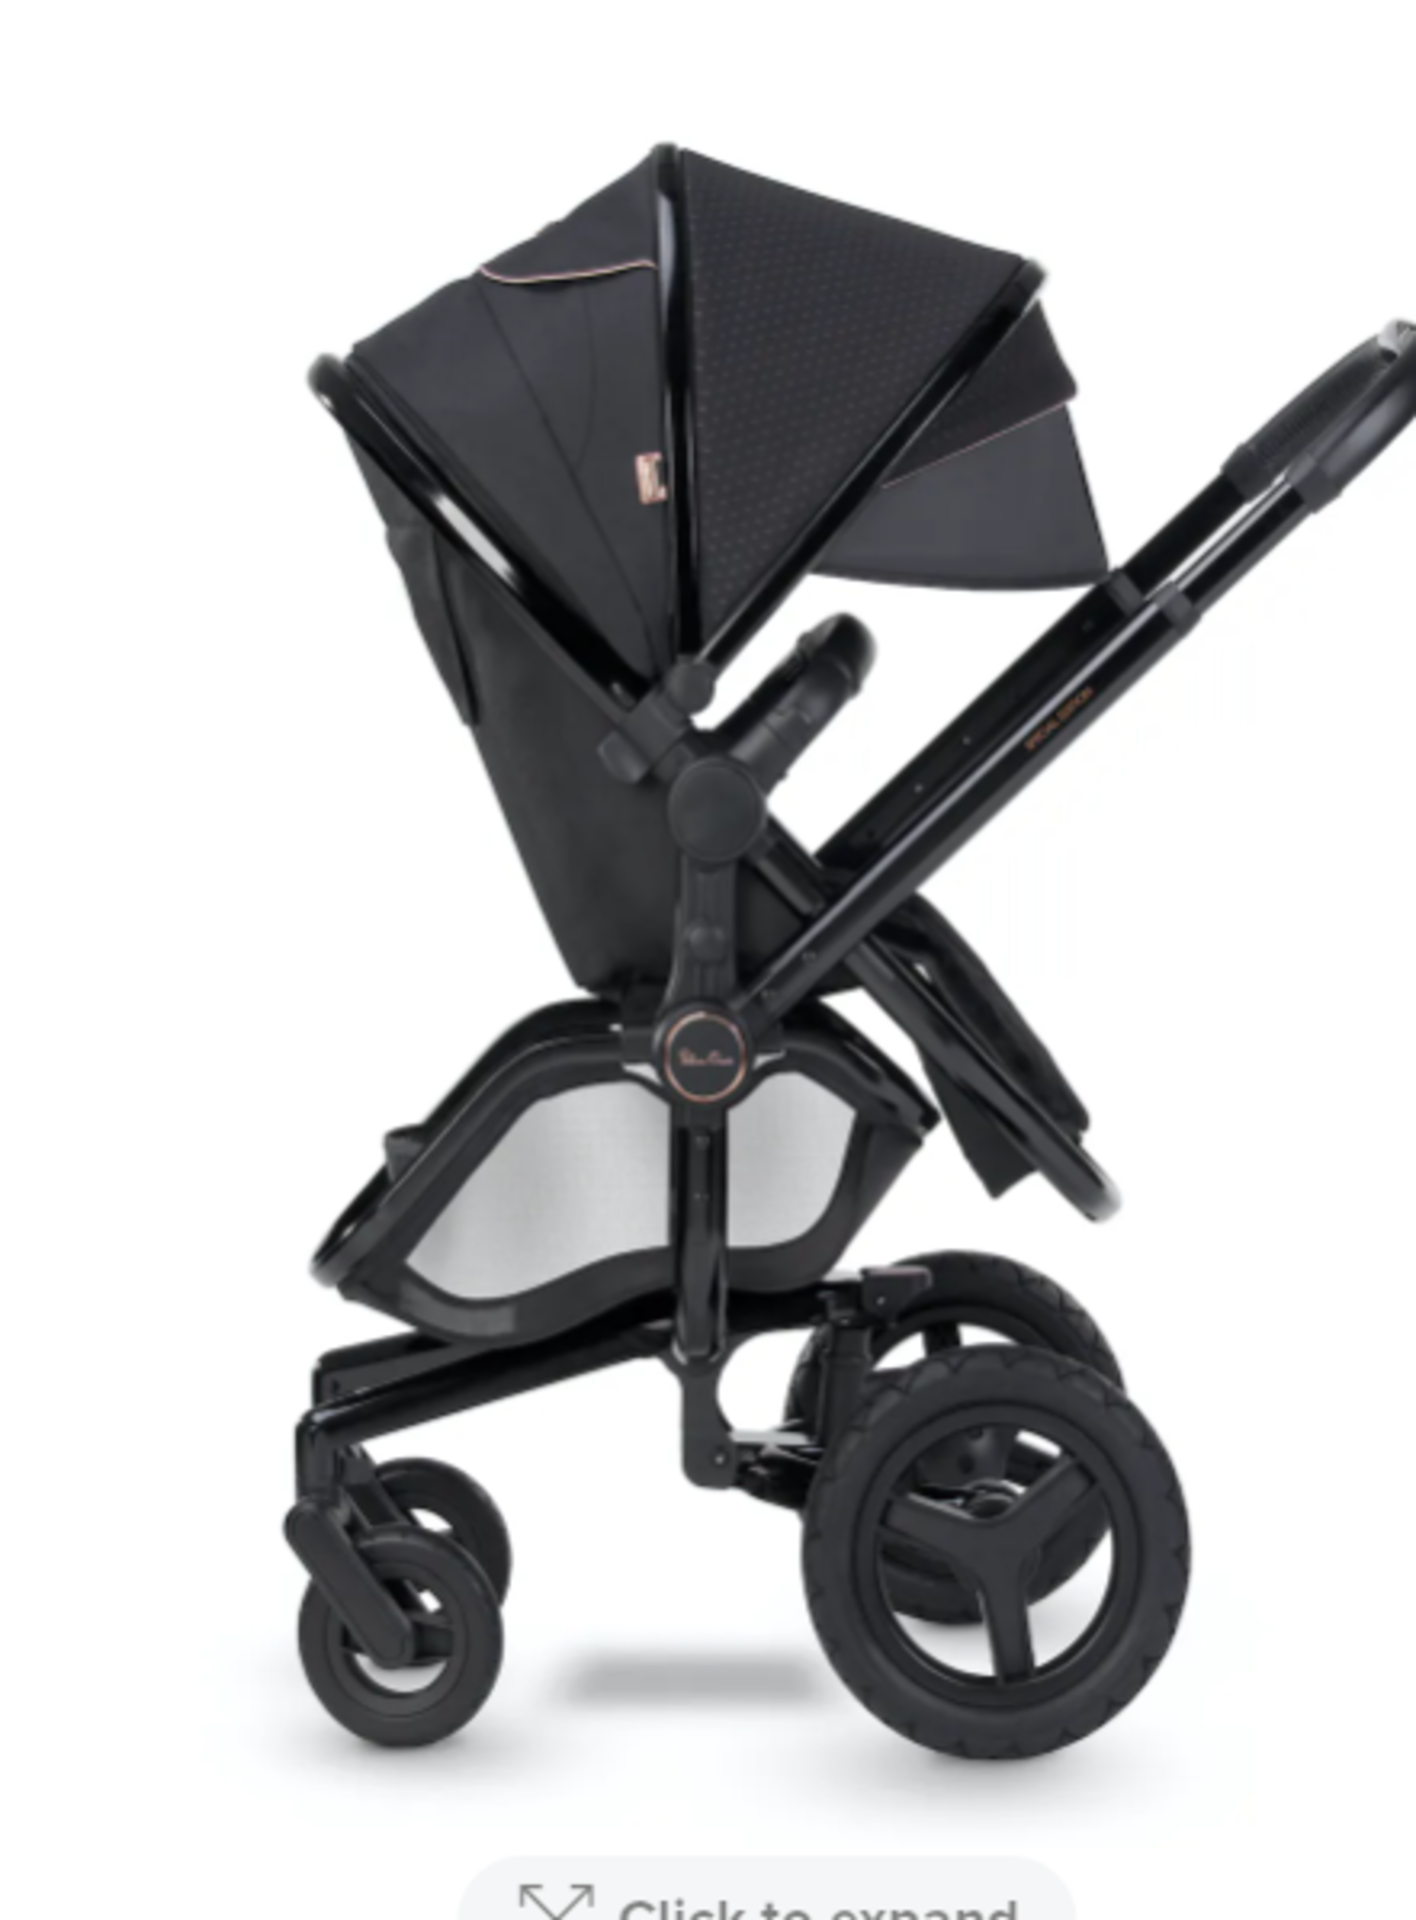 PALLET TO CONTAIN 6 X New Boxed Silver Cross Surf Eclipse Special Edition Pram. RRP £1,195 each. - Image 3 of 7